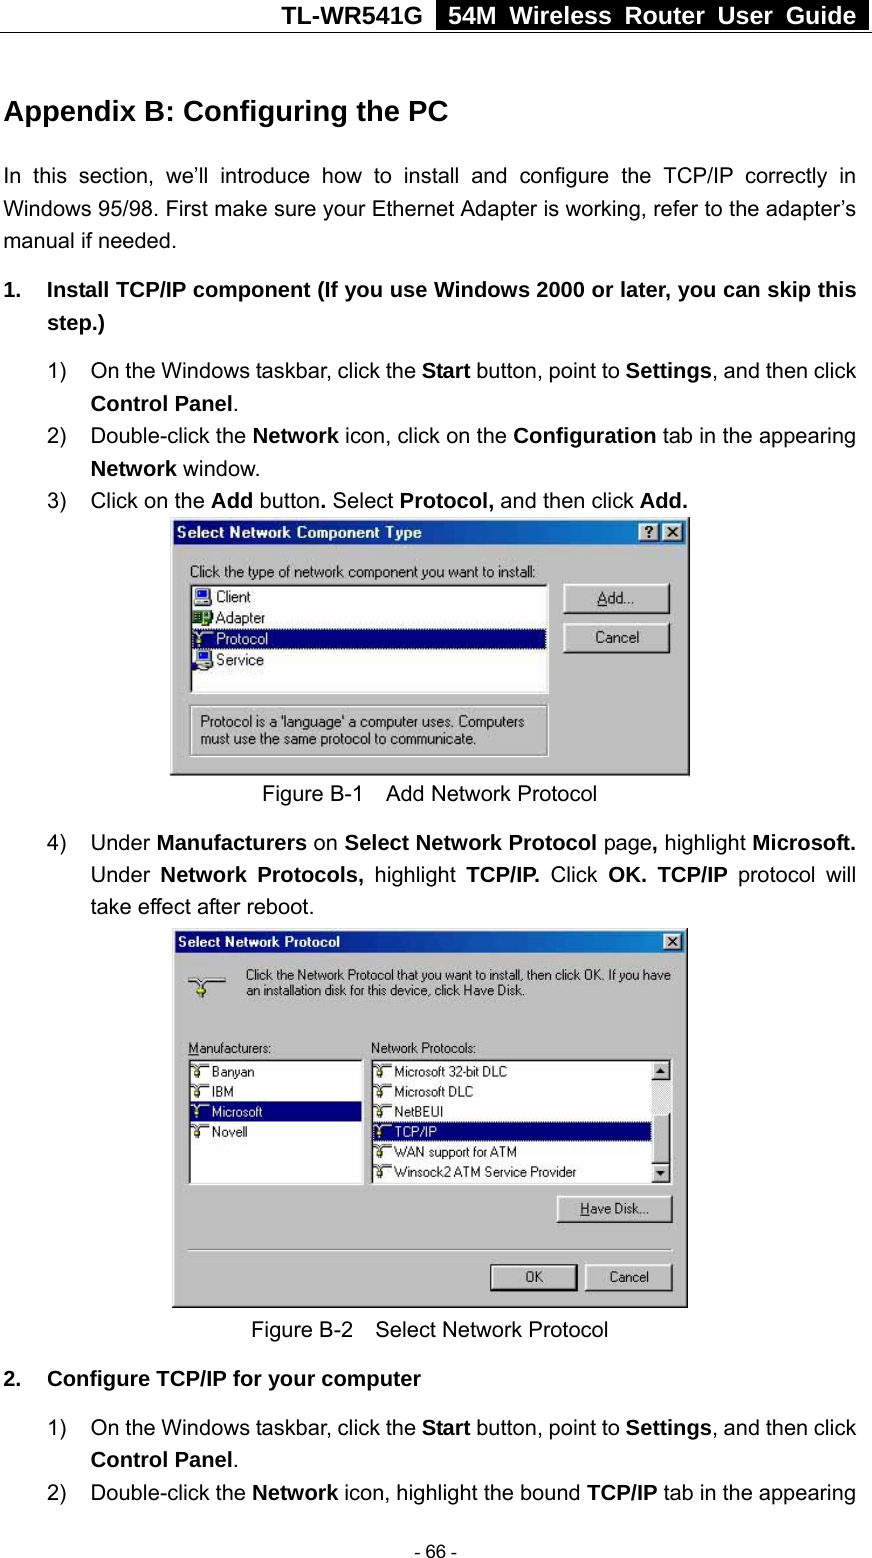 TL-WR541G   54M Wireless Router User Guide  Appendix B: Configuring the PC In this section, we’ll introduce how to install and configure the TCP/IP correctly in Windows 95/98. First make sure your Ethernet Adapter is working, refer to the adapter’s manual if needed.   1.  Install TCP/IP component (If you use Windows 2000 or later, you can skip this step.) 1)  On the Windows taskbar, click the Start button, point to Settings, and then click Control Panel. 2) Double-click the Network icon, click on the Configuration tab in the appearing Network window.  3)  Click on the Add button. Select Protocol, and then click Add.  Figure B-1    Add Network Protocol 4) Under Manufacturers on Select Network Protocol page, highlight Microsoft. Under Network Protocols, highlight TCP/IP. Click OK. TCP/IP protocol will take effect after reboot.  Figure B-2    Select Network Protocol 2.  Configure TCP/IP for your computer 1)  On the Windows taskbar, click the Start button, point to Settings, and then click Control Panel. 2) Double-click the Network icon, highlight the bound TCP/IP tab in the appearing  - 66 - 